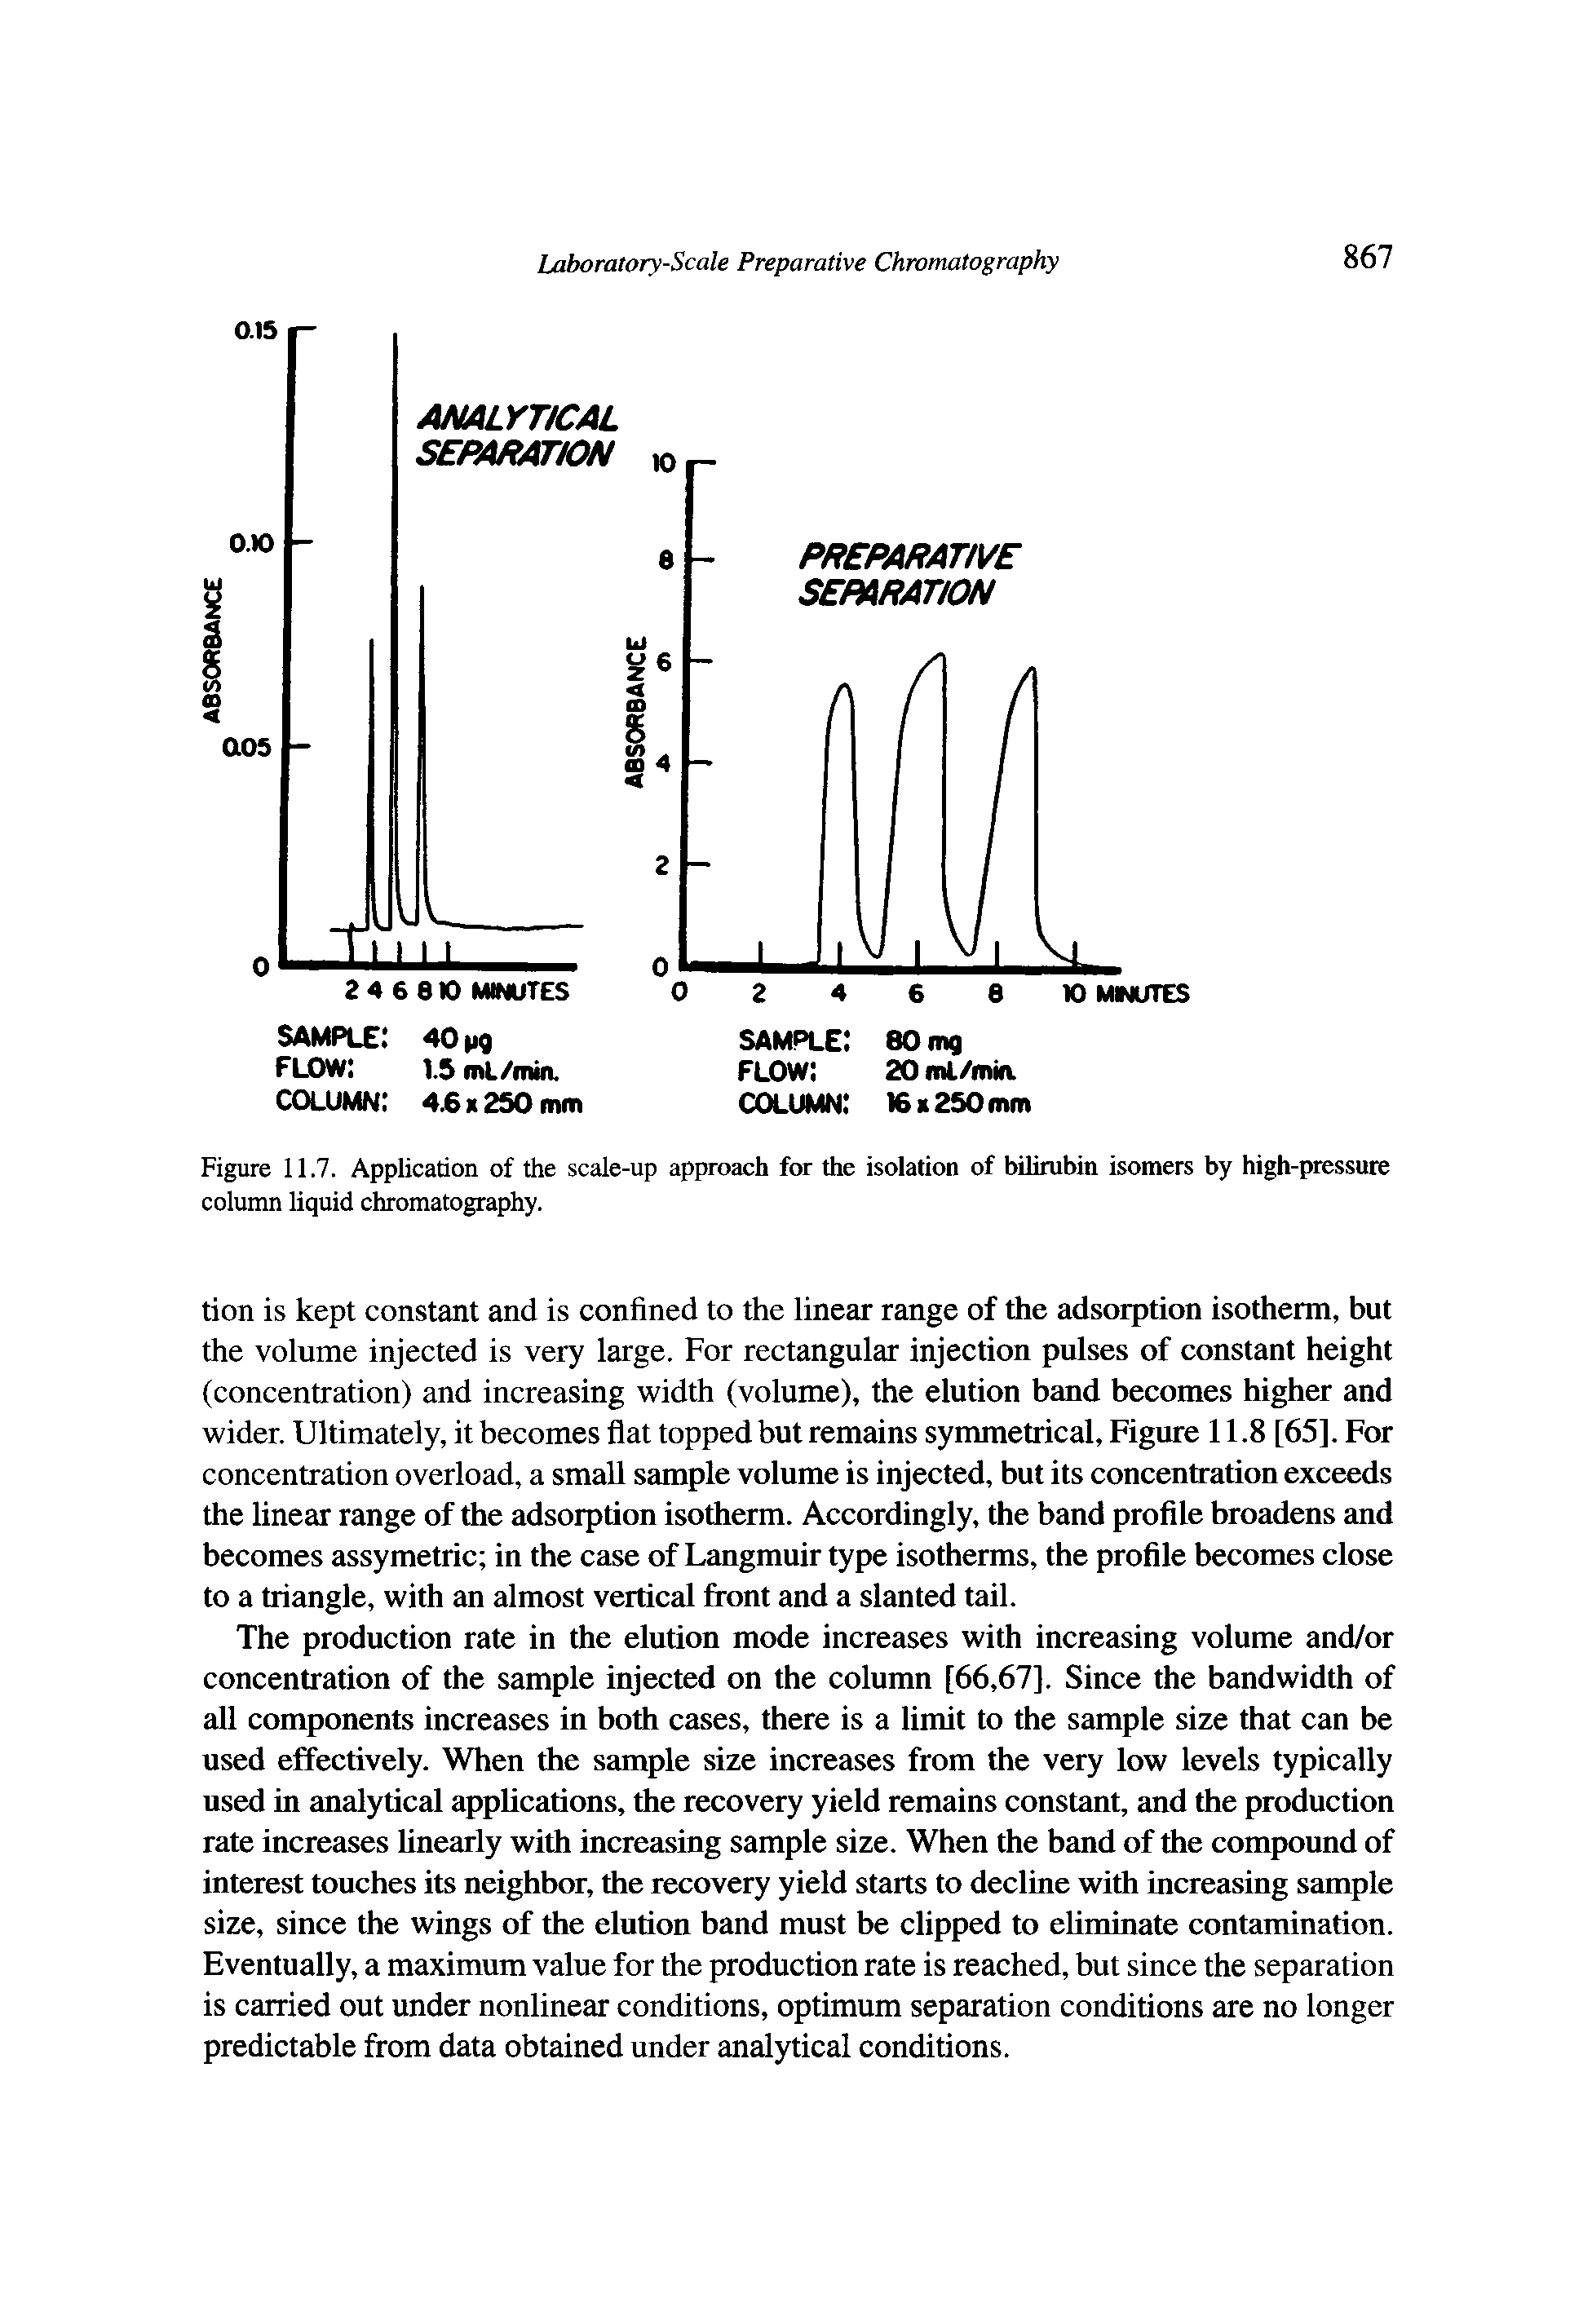 Figure 11.7. Application of the scale-up approach for the isolation of bilirubin isomers by high-pressure column liquid chromatography.